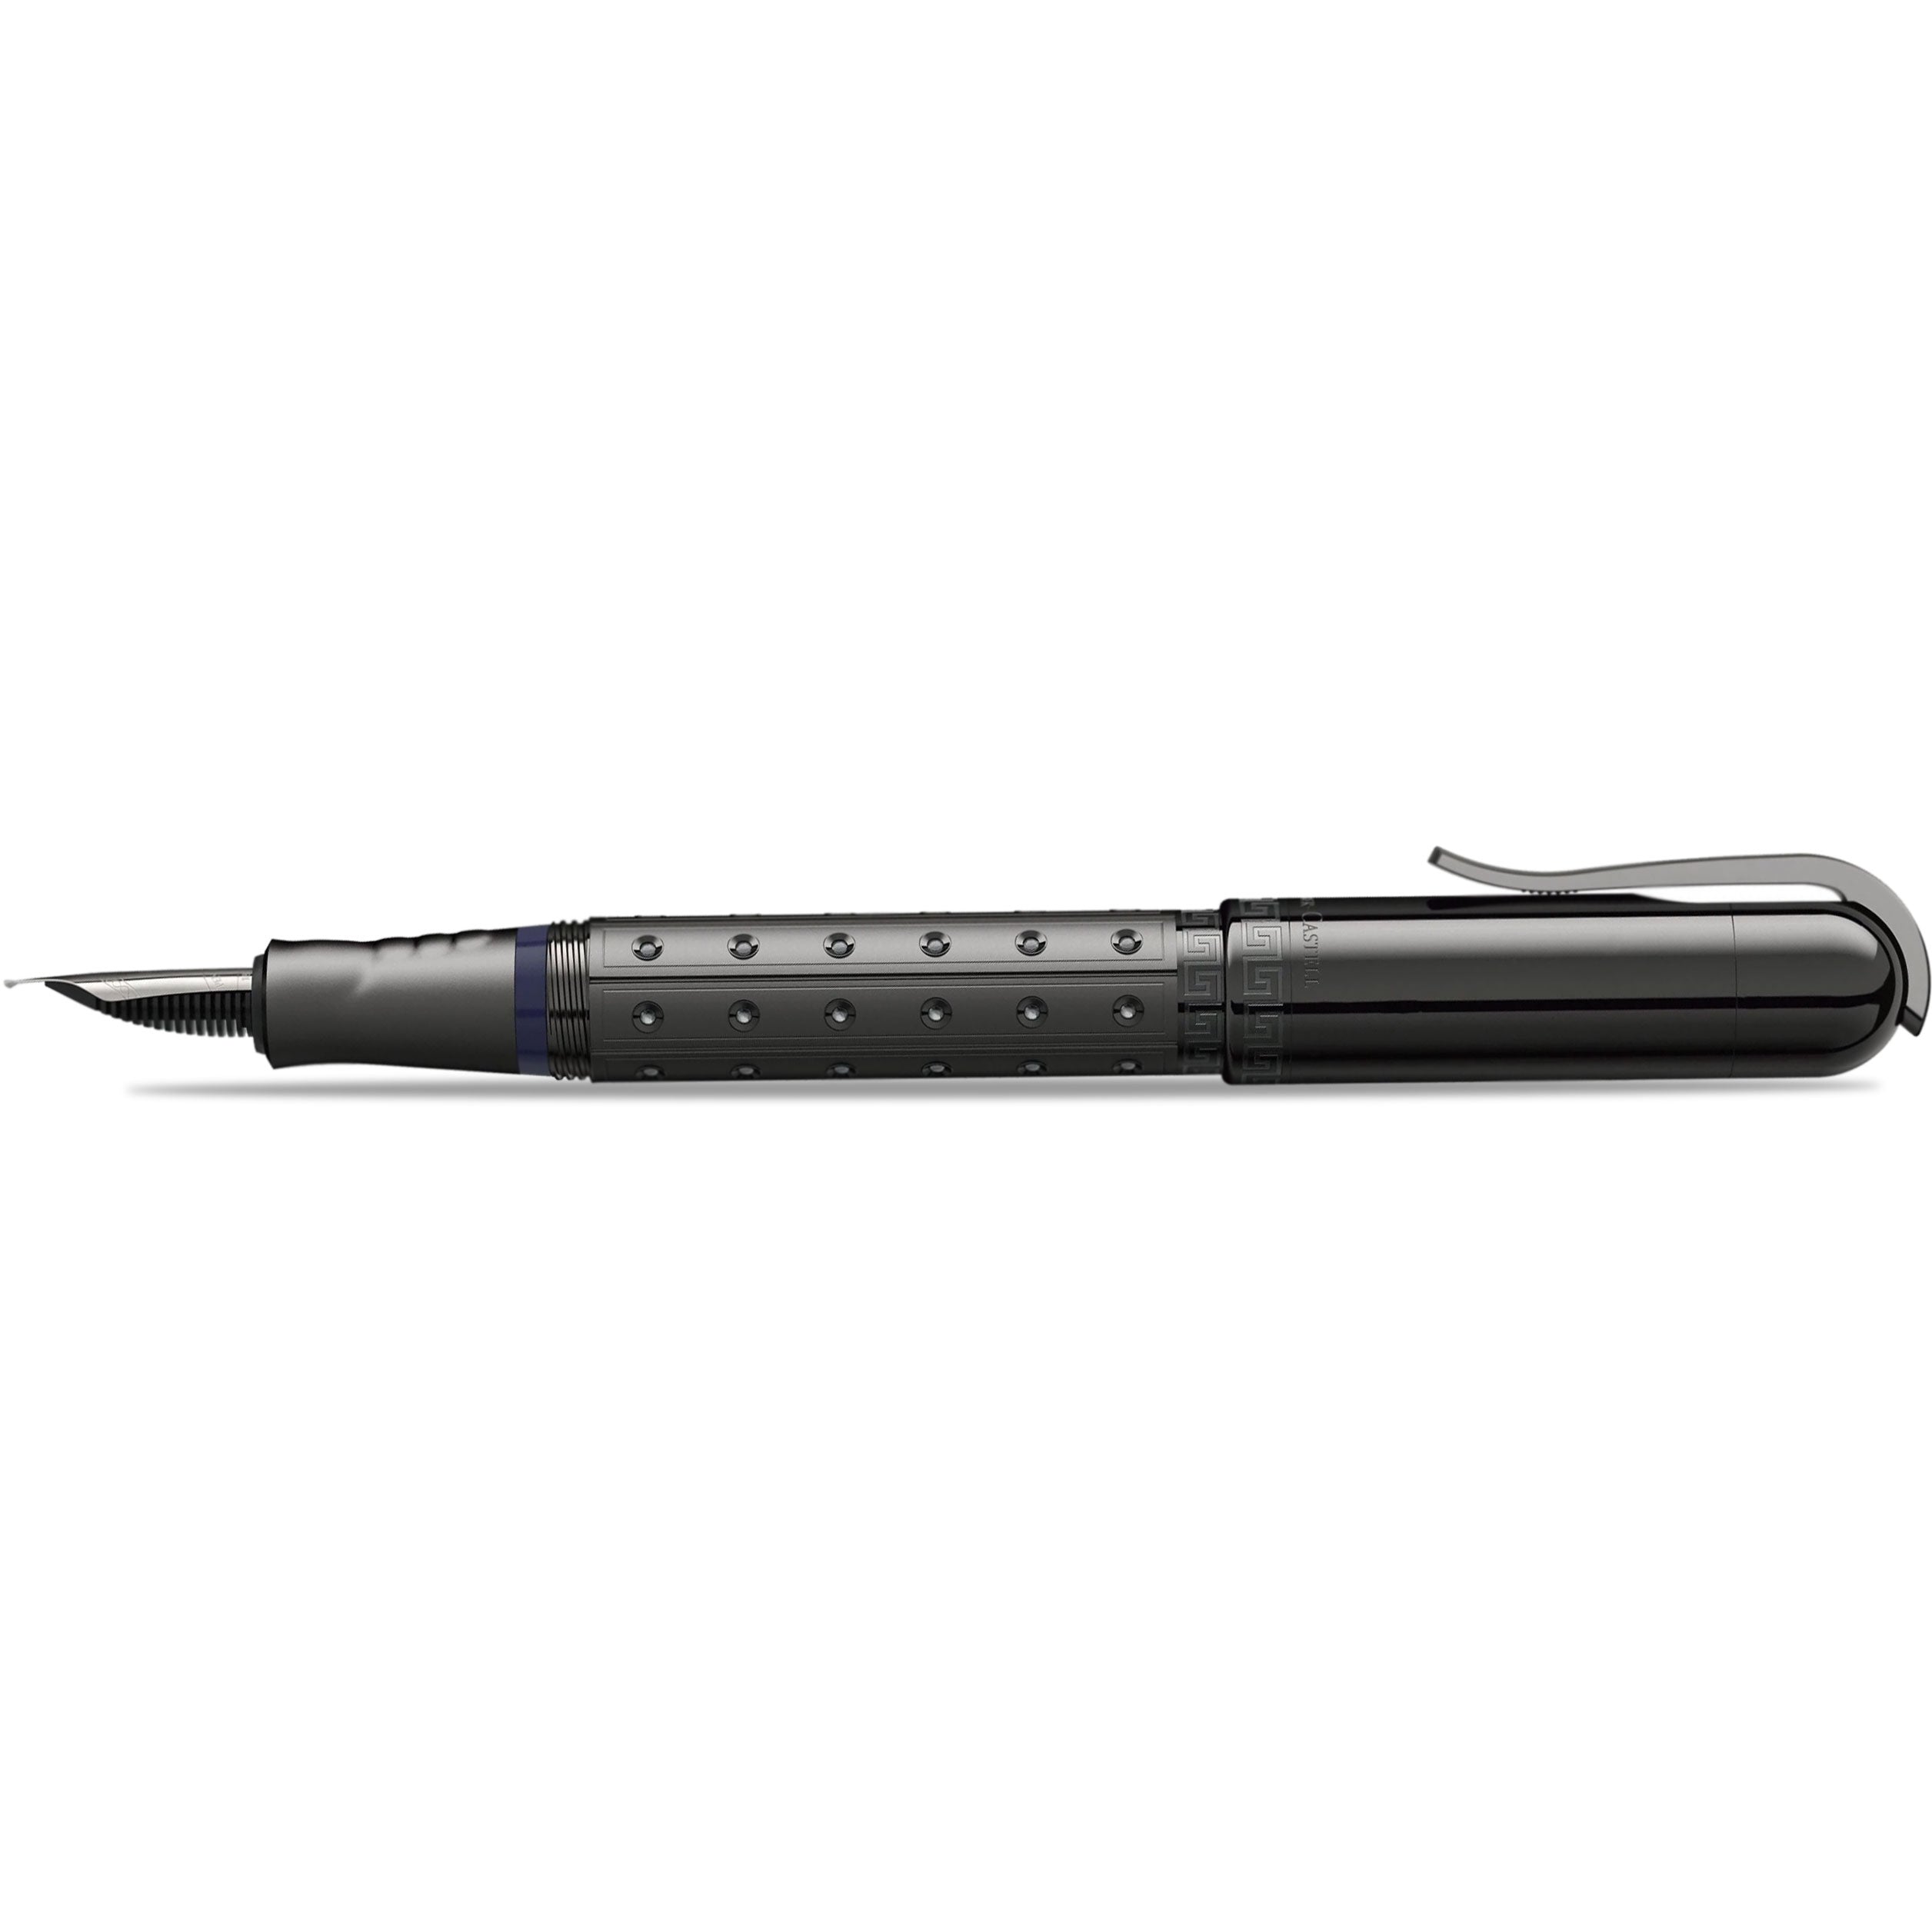 Faber Castell Pen of the Year 2019 Pen Black Edition fountain pen